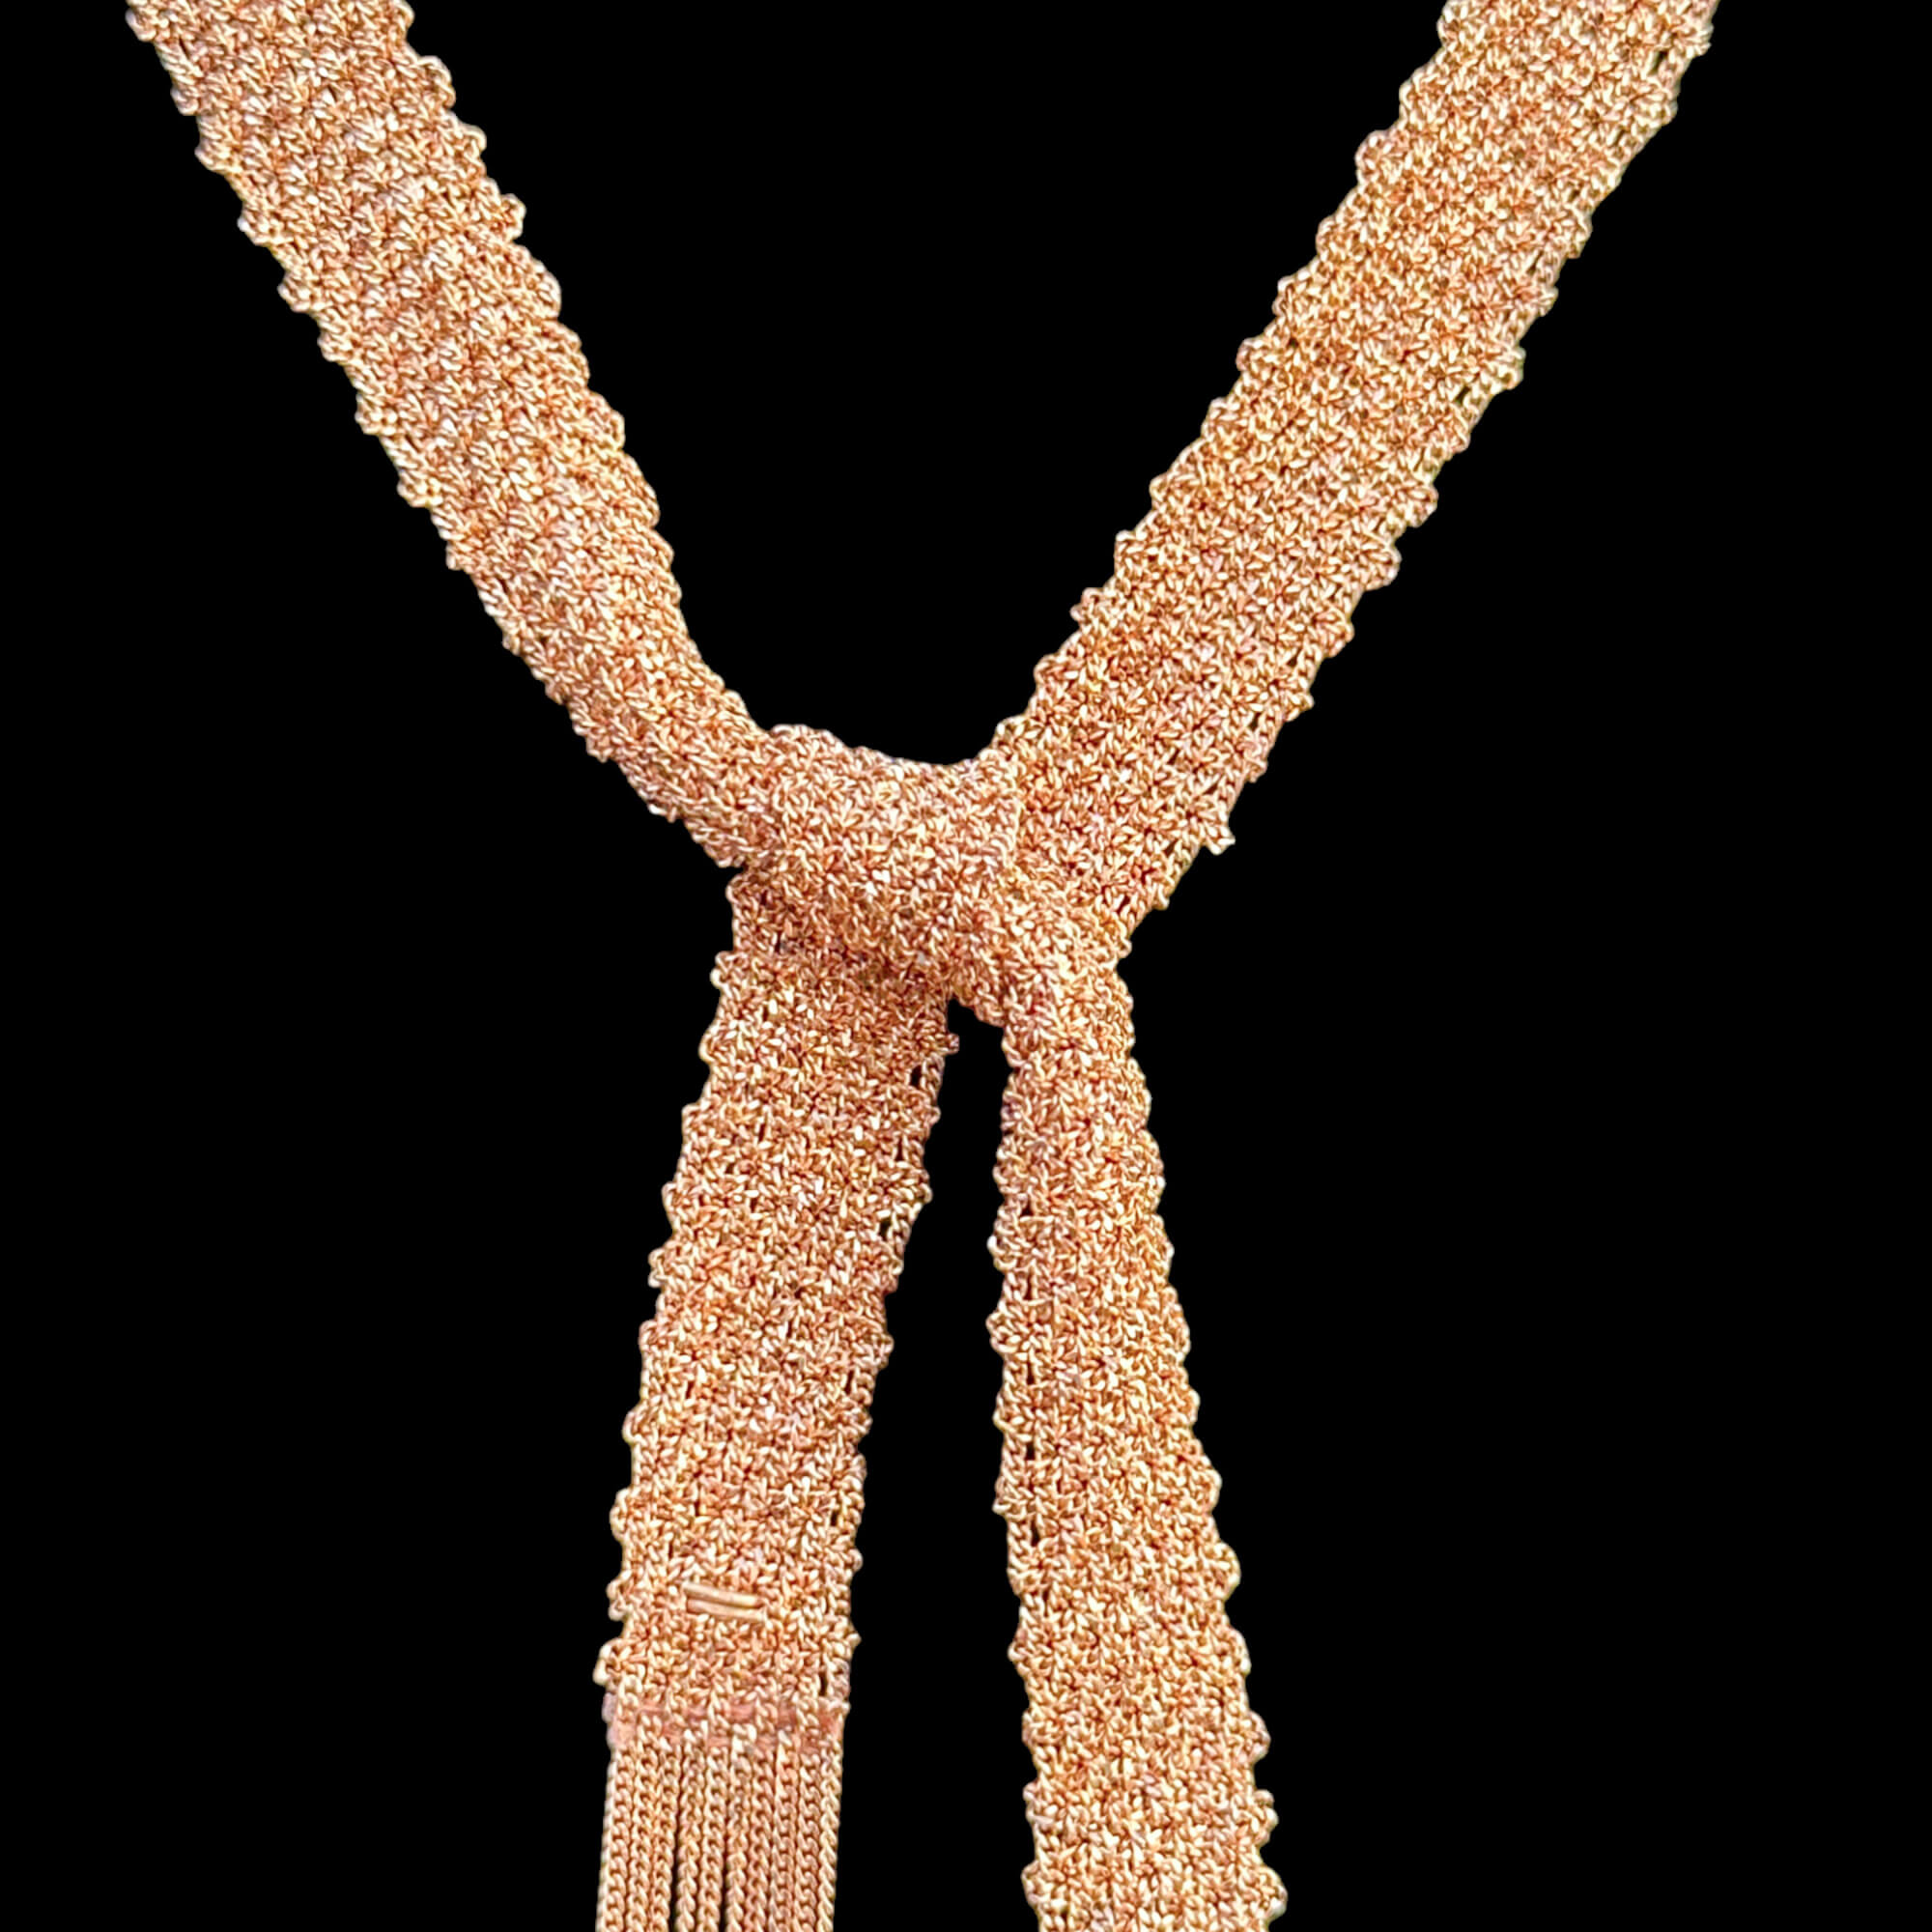 Rosé scarf or interwoven chains